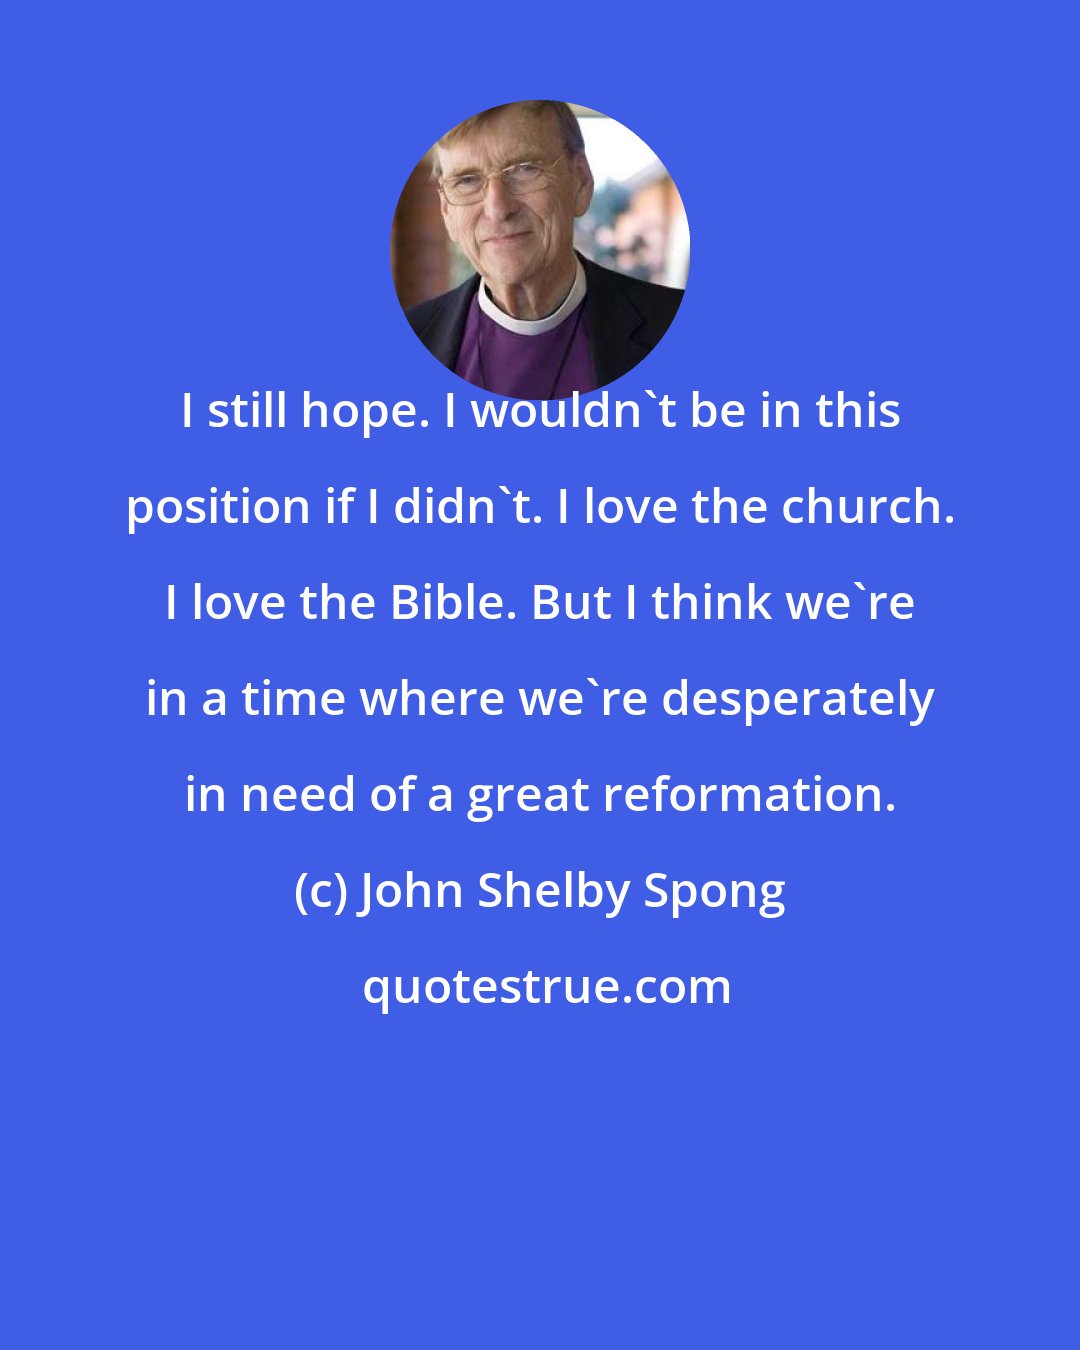 John Shelby Spong: I still hope. I wouldn't be in this position if I didn't. I love the church. I love the Bible. But I think we're in a time where we're desperately in need of a great reformation.